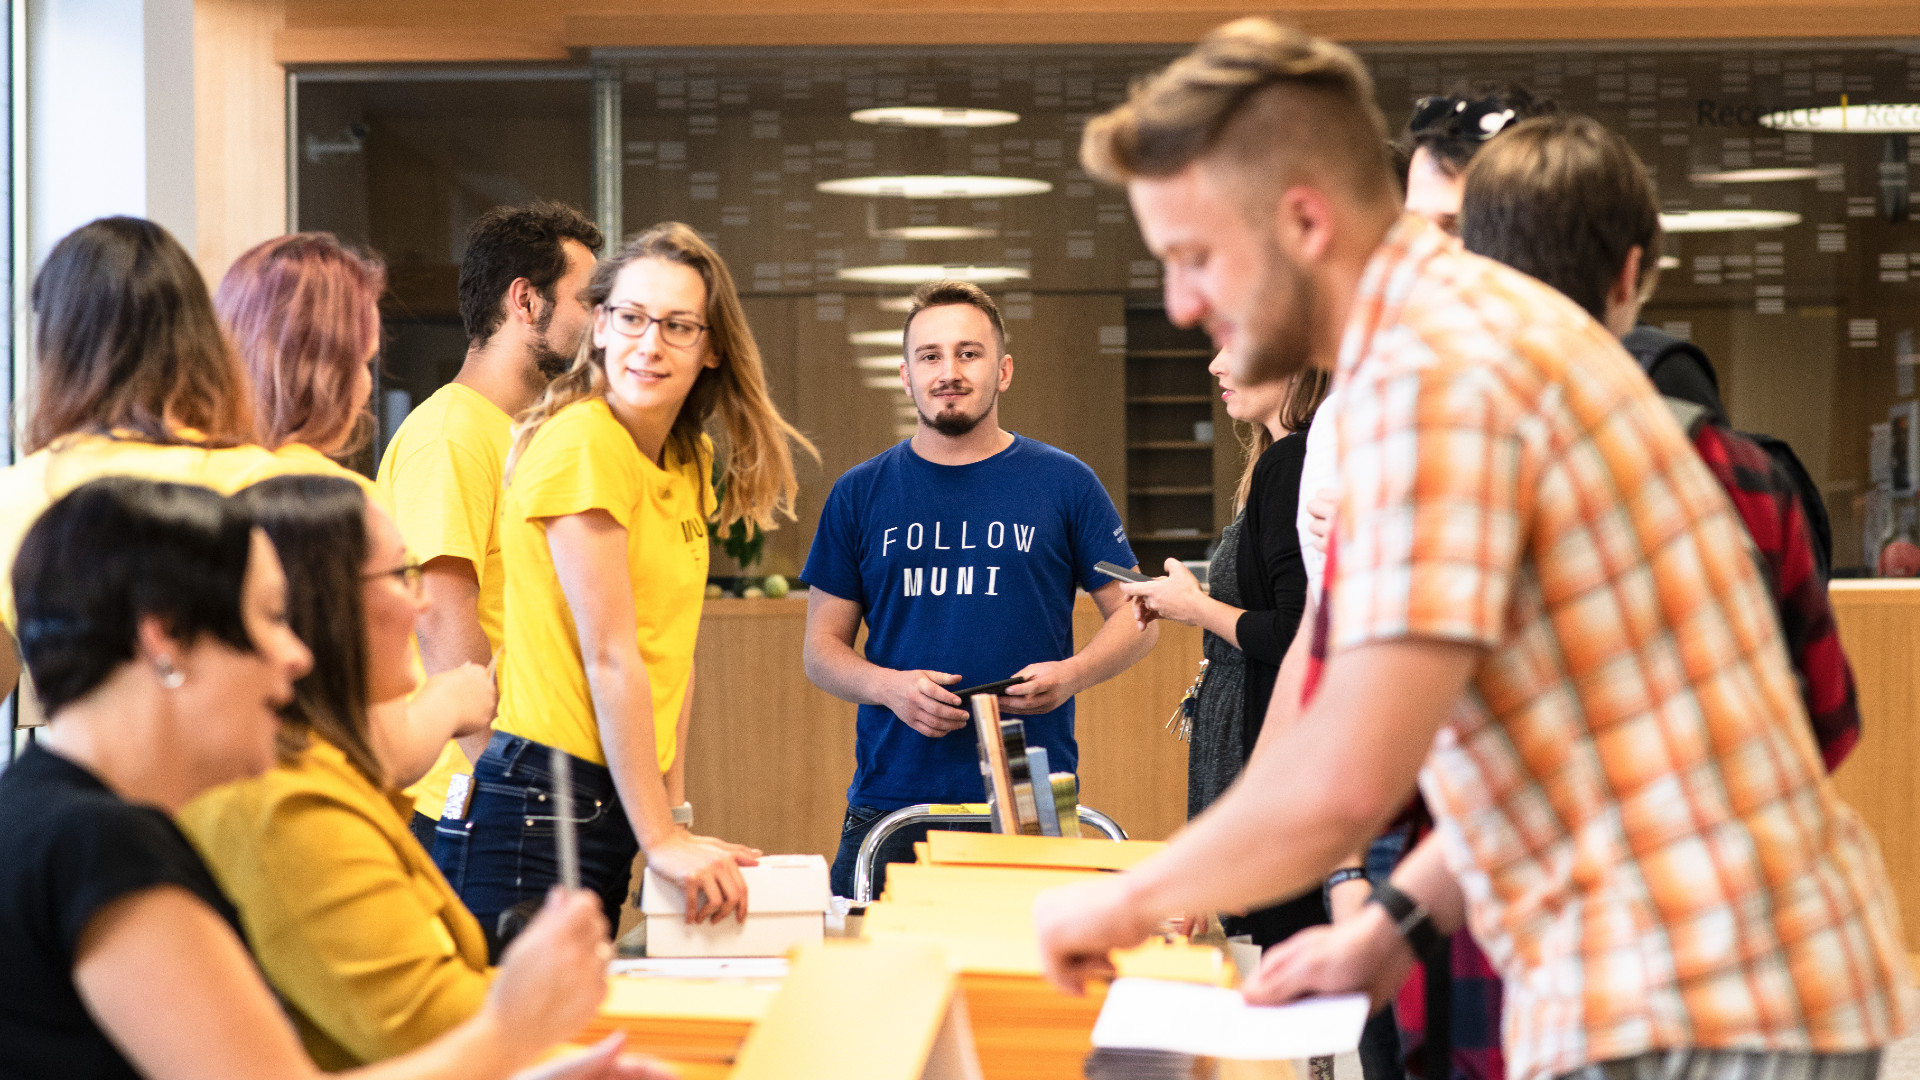 Open Days registration in the foyer of the faculty